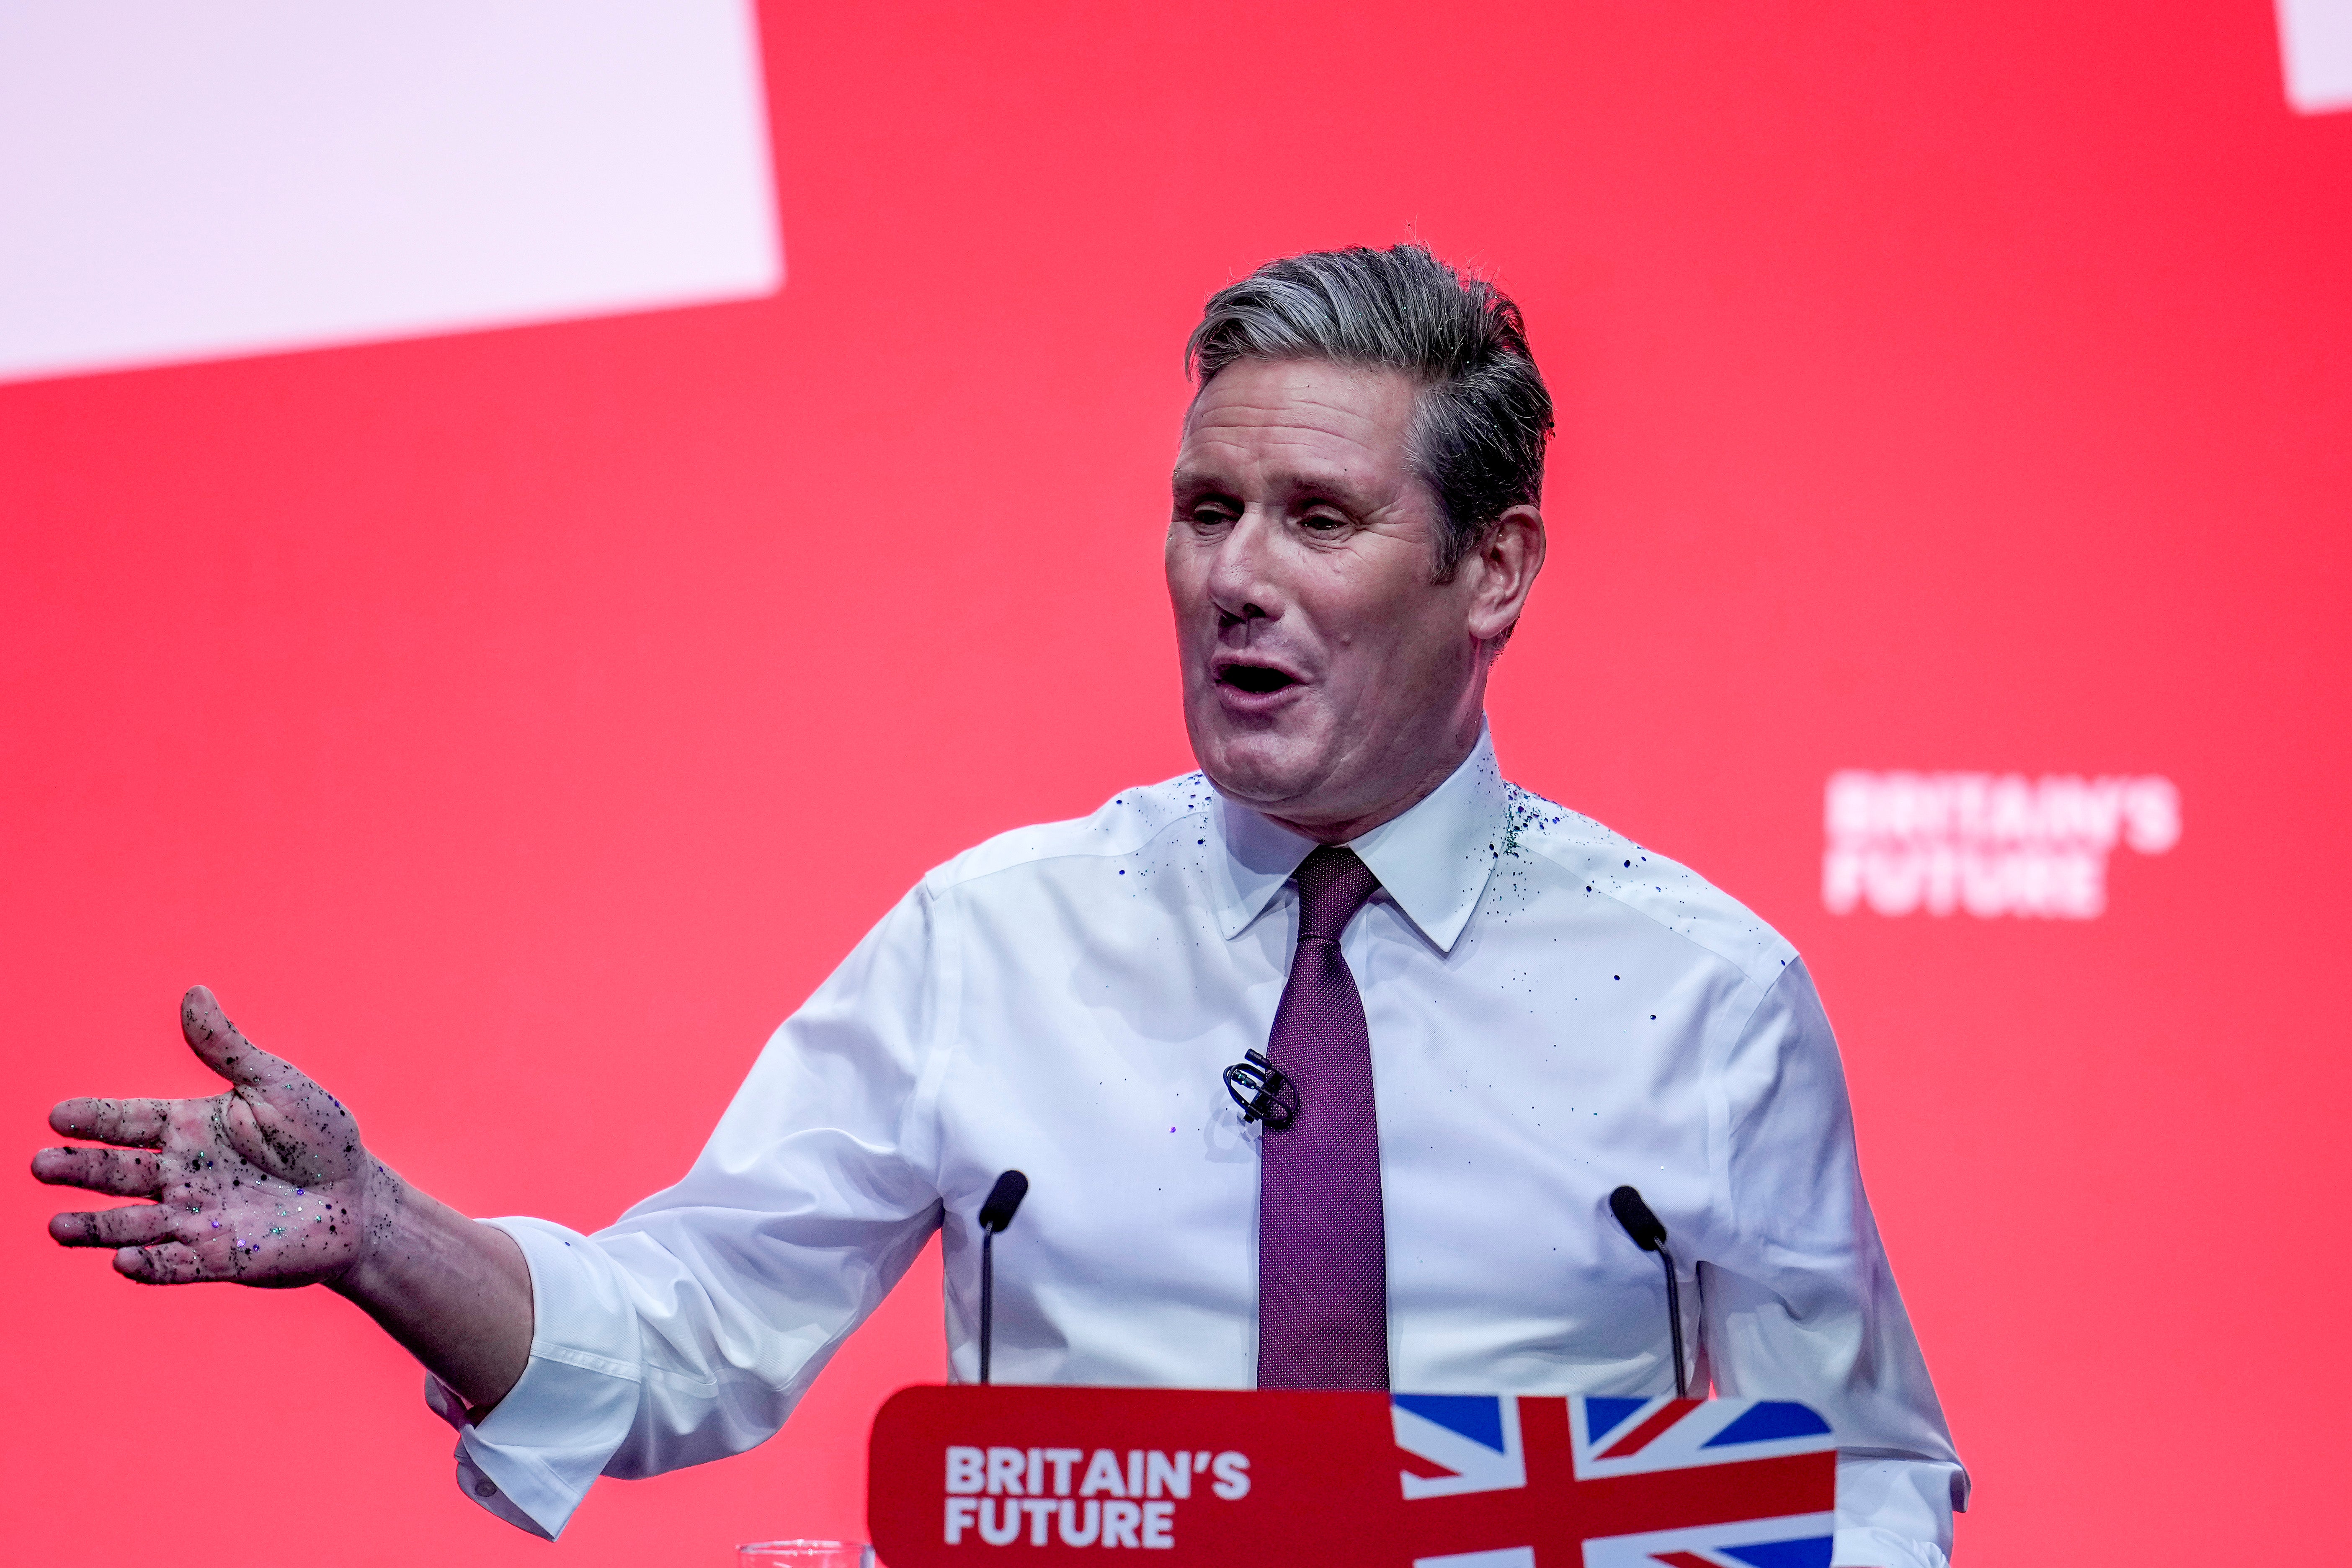 Keir Starmer delivers leader’s speech with glitter on shoulders